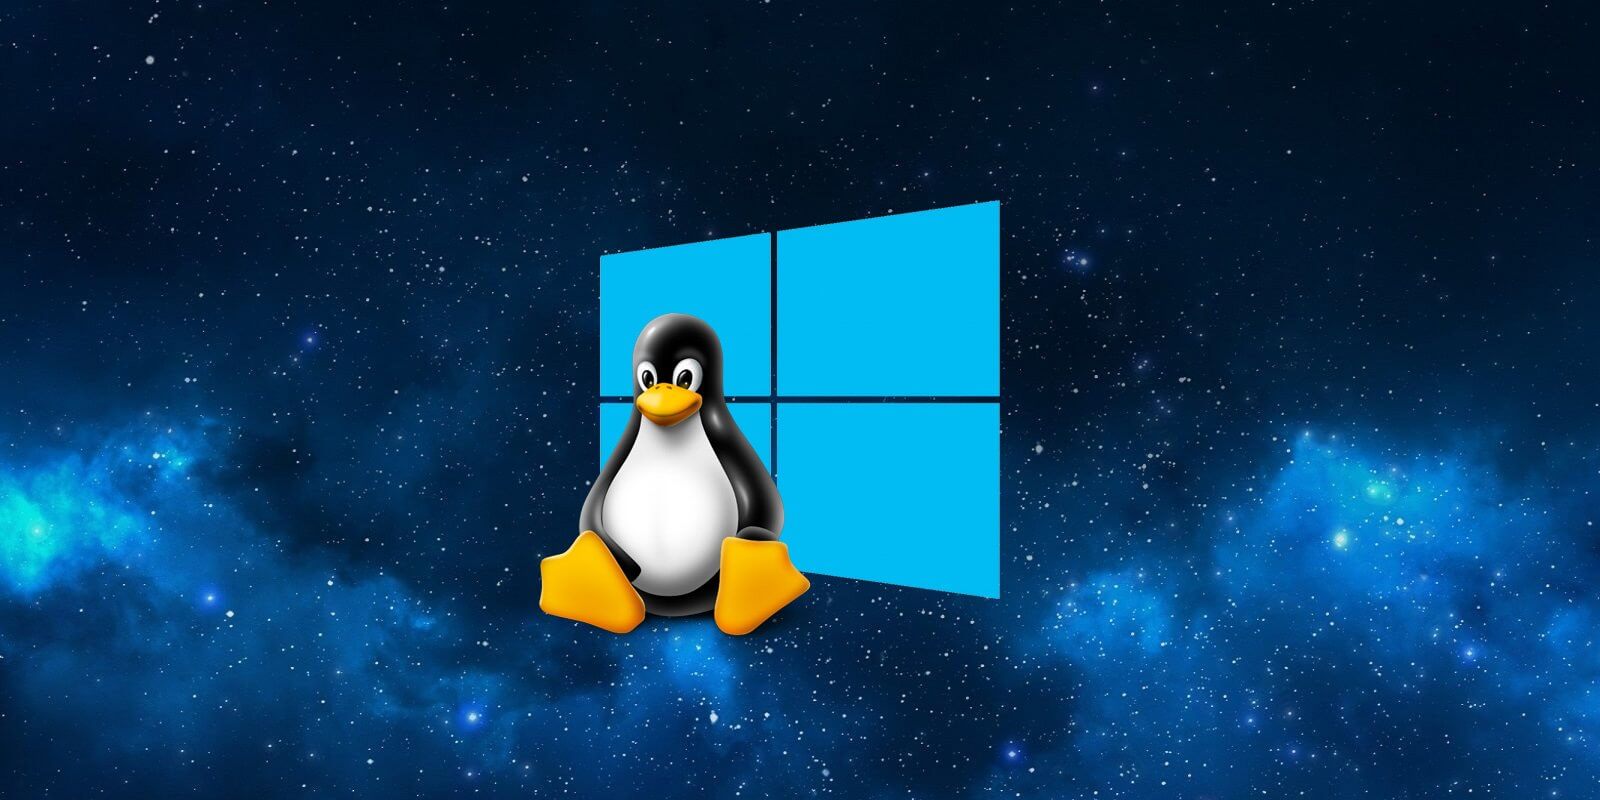 Is Linux Faster than Windows?